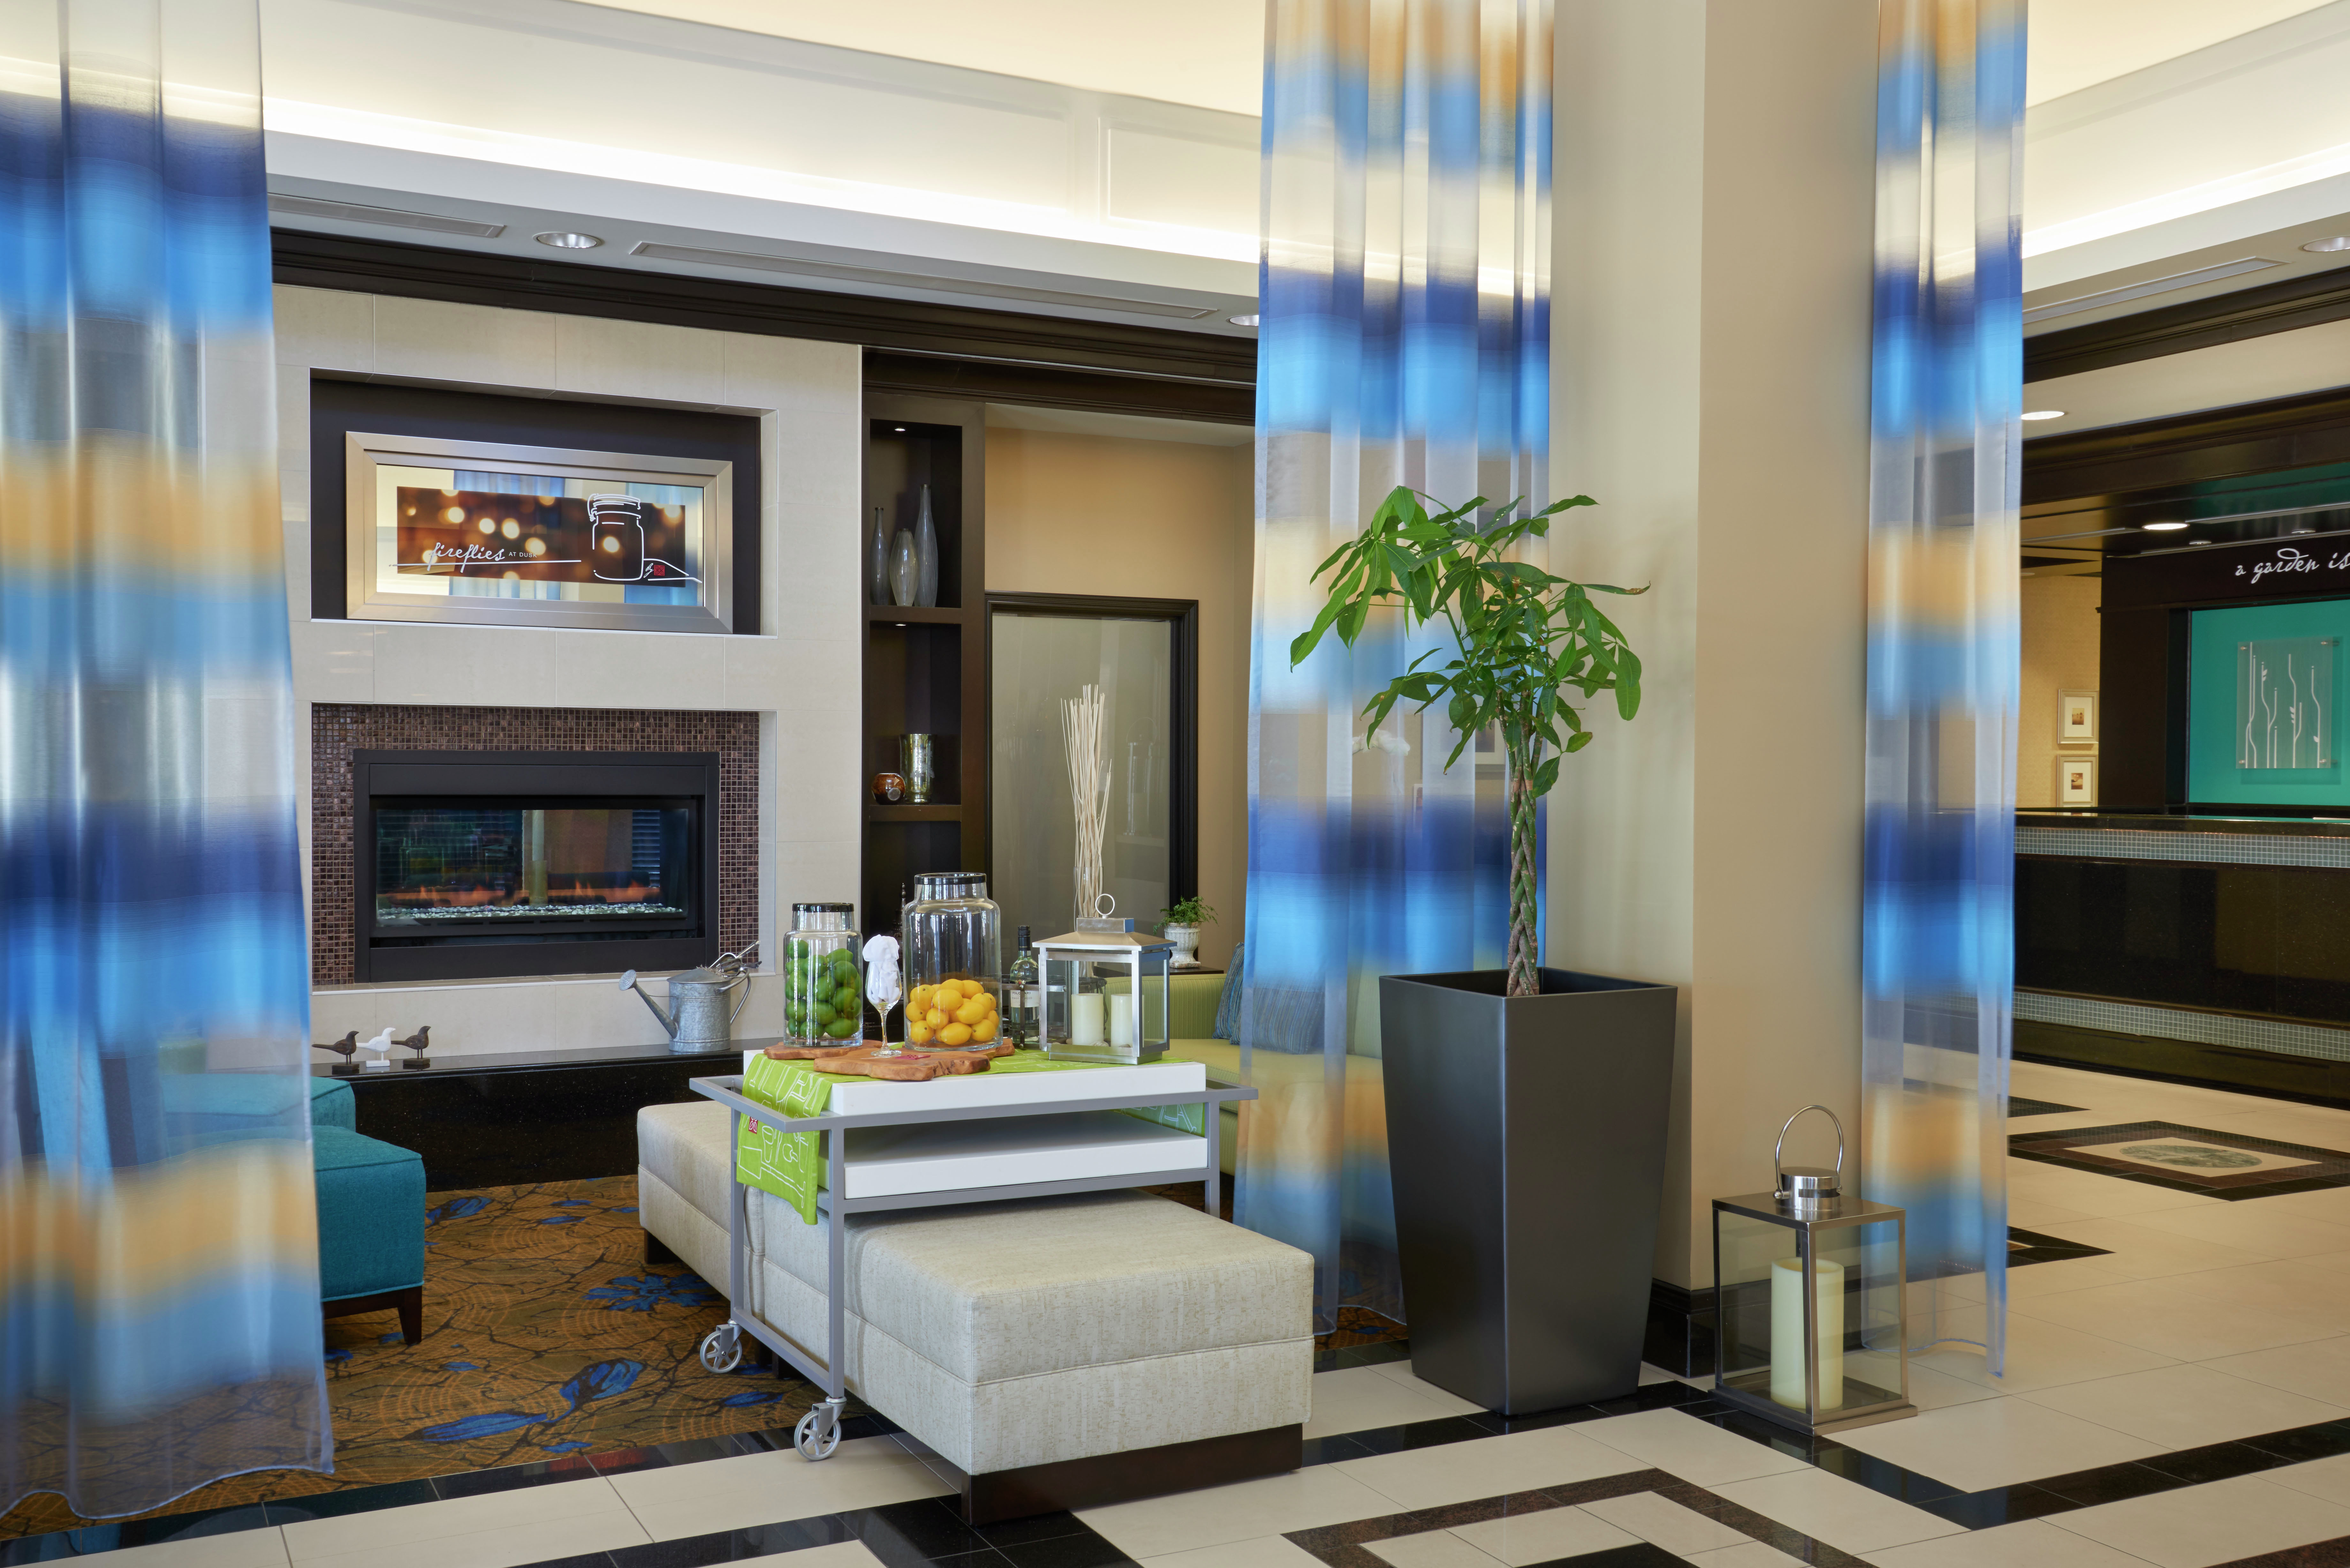 Beverage Station, Lounge Seating, Long Drapes, Fireplace in Lobby With View of Front Desk